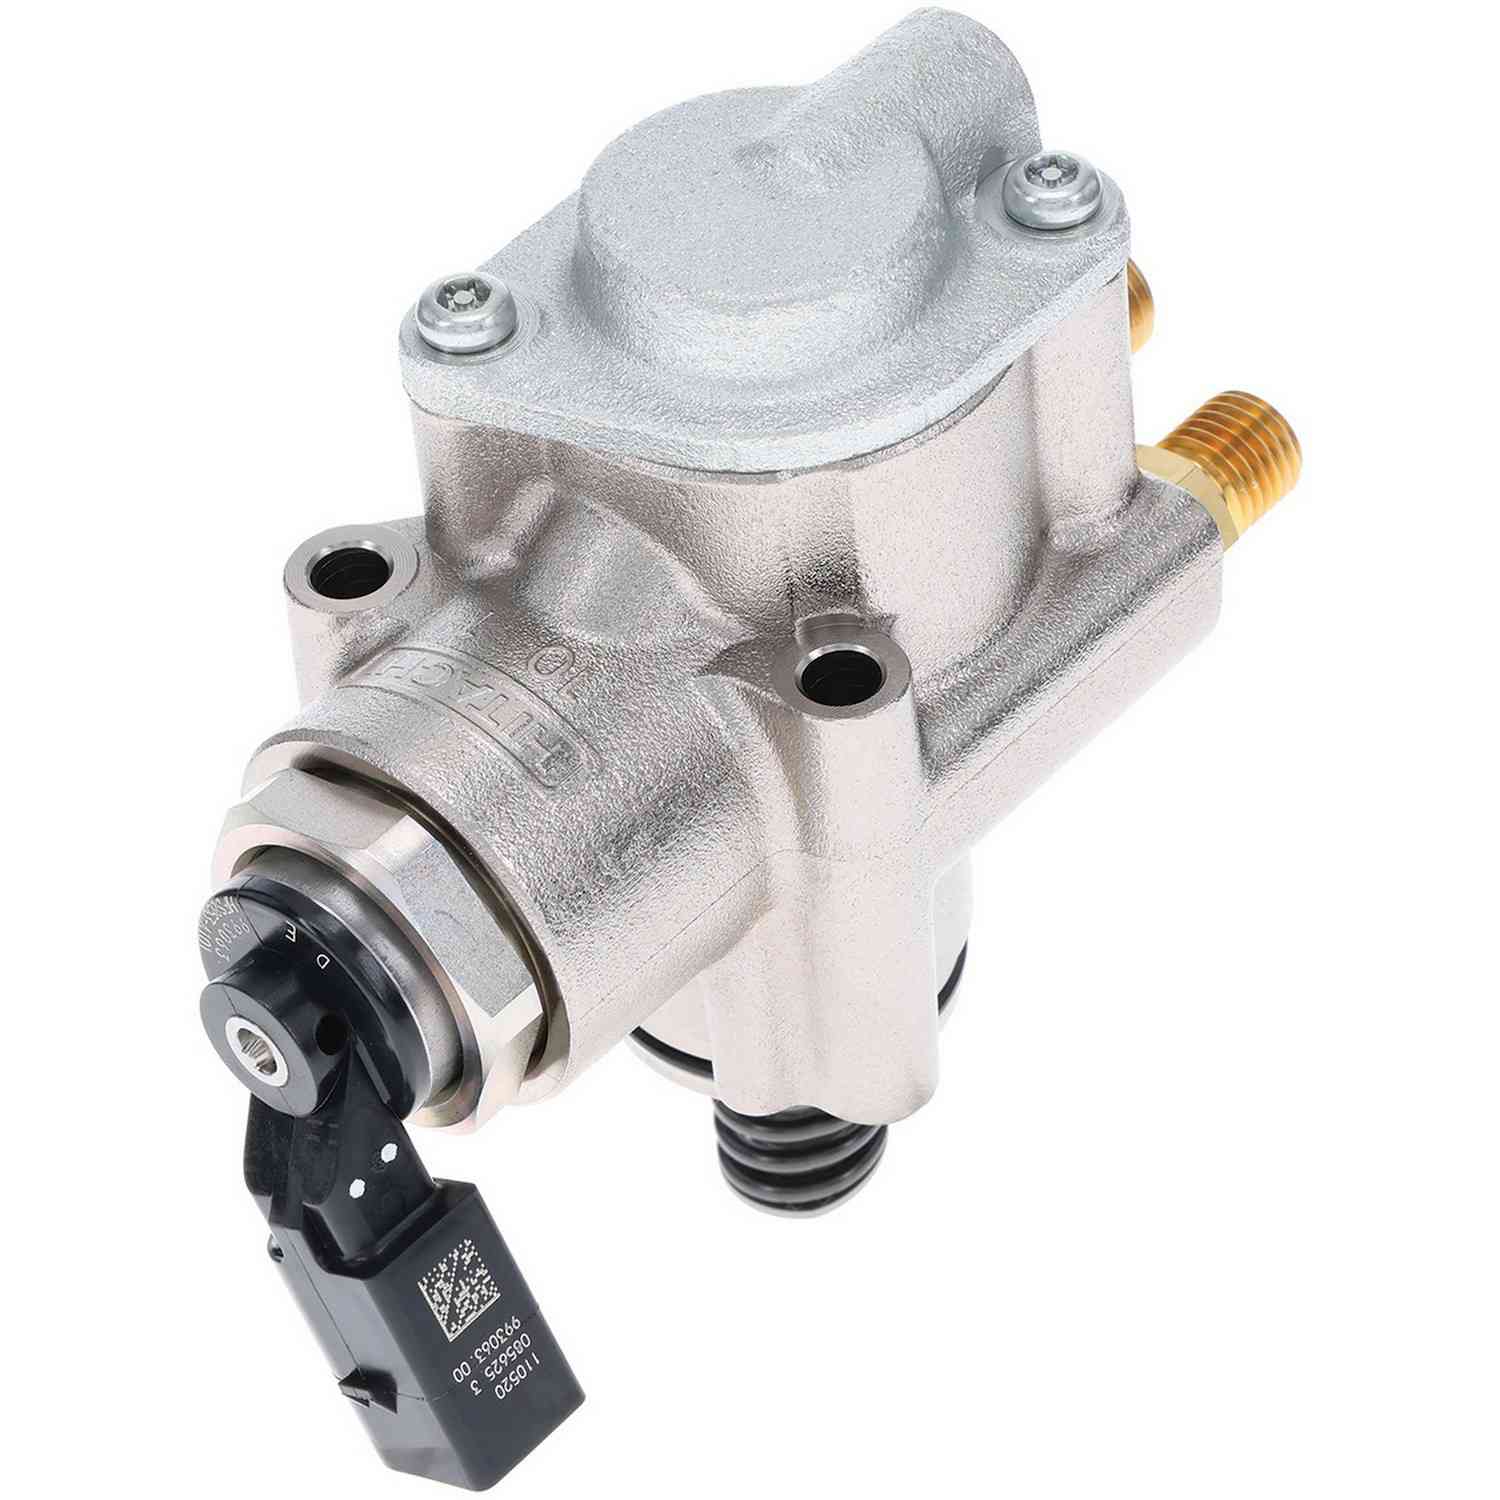 Angle View of Direct Injection High Pressure Fuel Pump HITACHI HPP0003